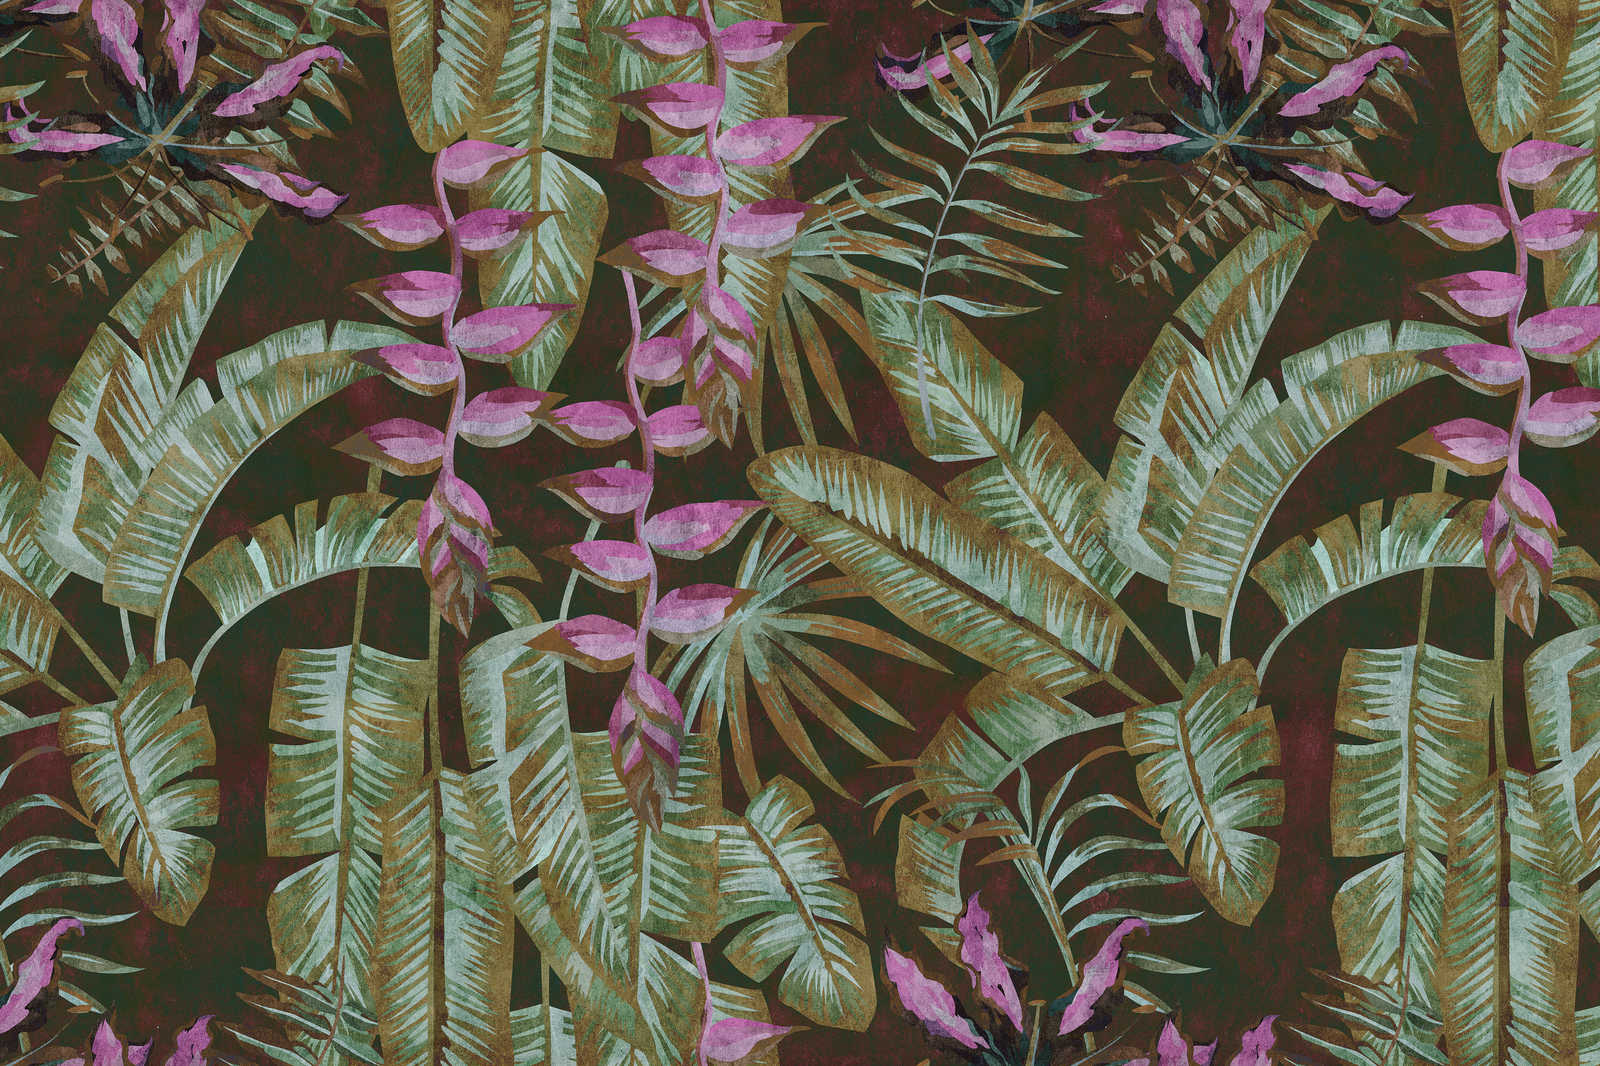             Tropicana 1 - Jungle Canvas Painting with Banana Leaves & Ferns - 0.90 m x 0.60 m
        